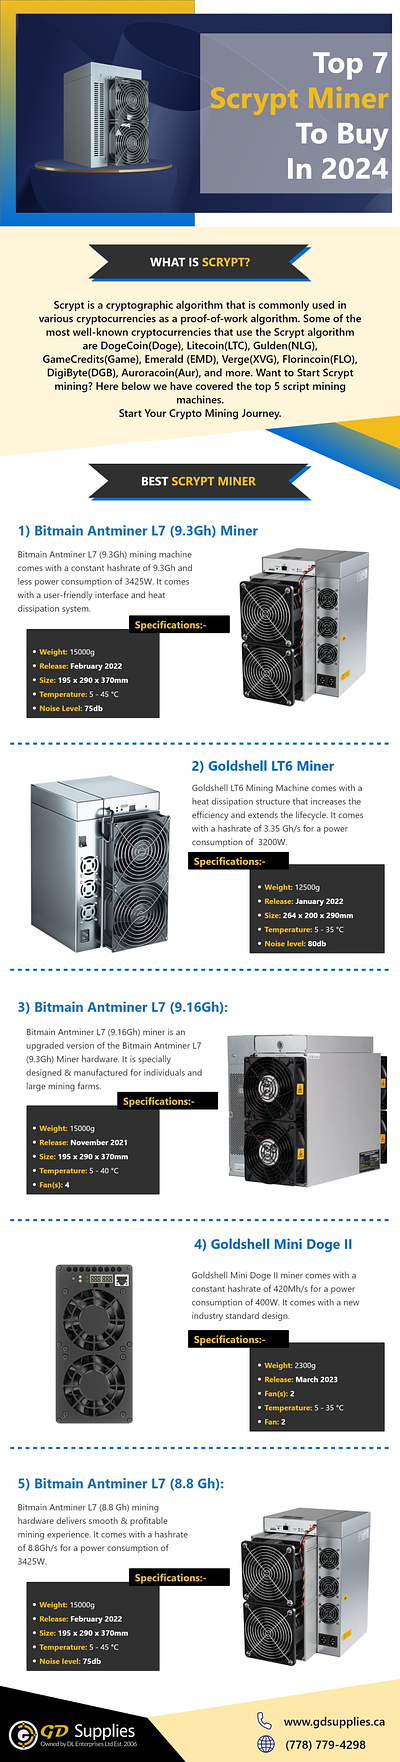 Top 7 Scrypt Mining Machine to buy in 2024 scrypt mining hardware scrypt mining machine